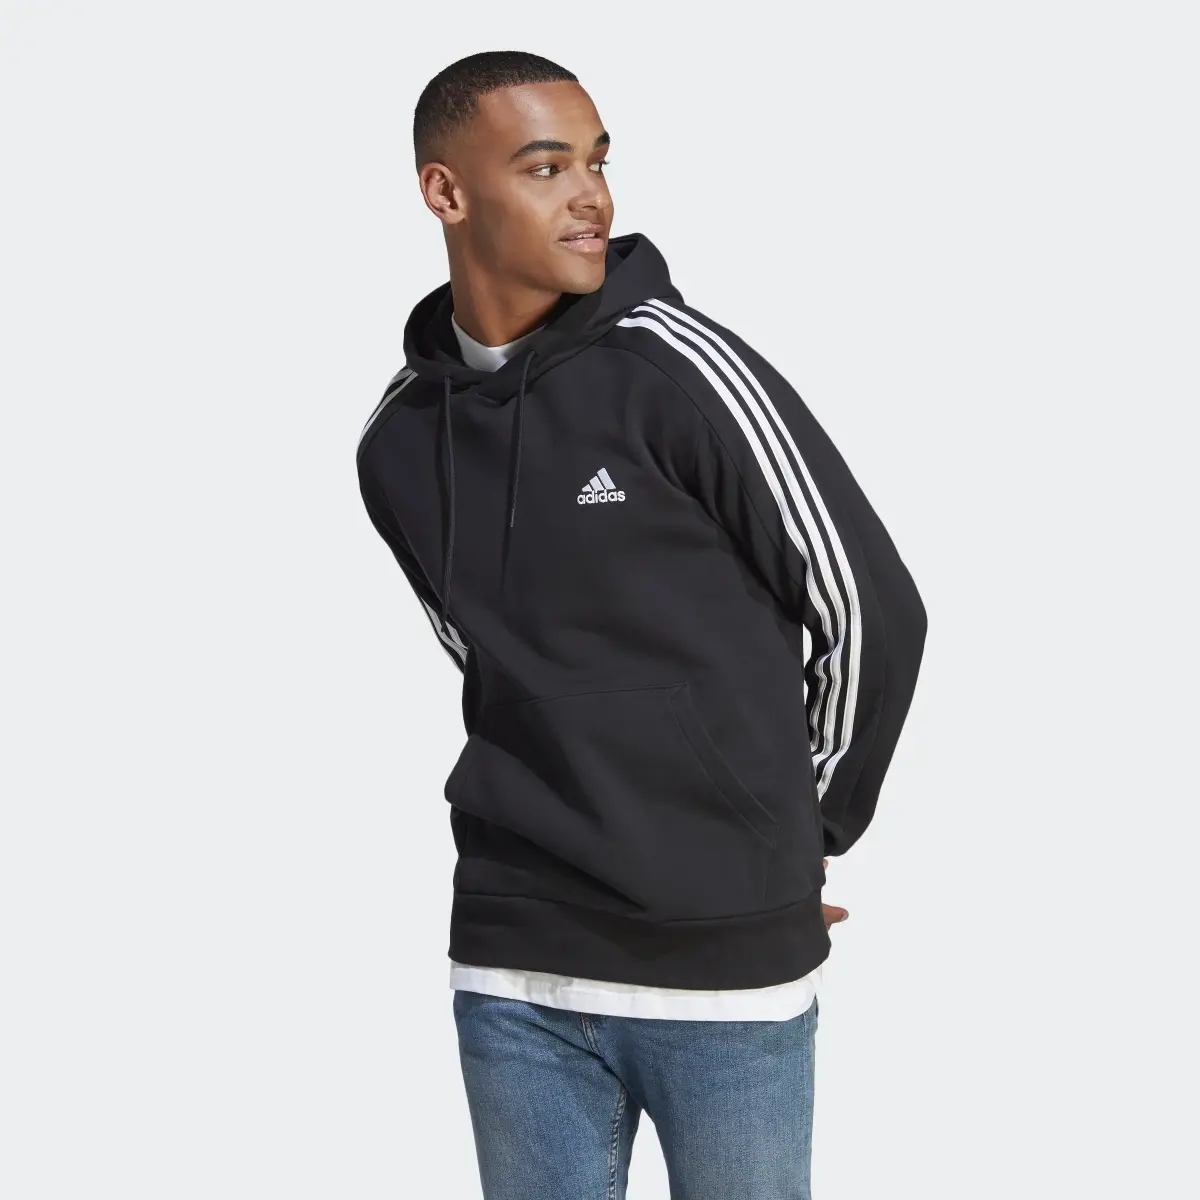 Adidas Essentials French Terry 3-Stripes Hoodie. 2